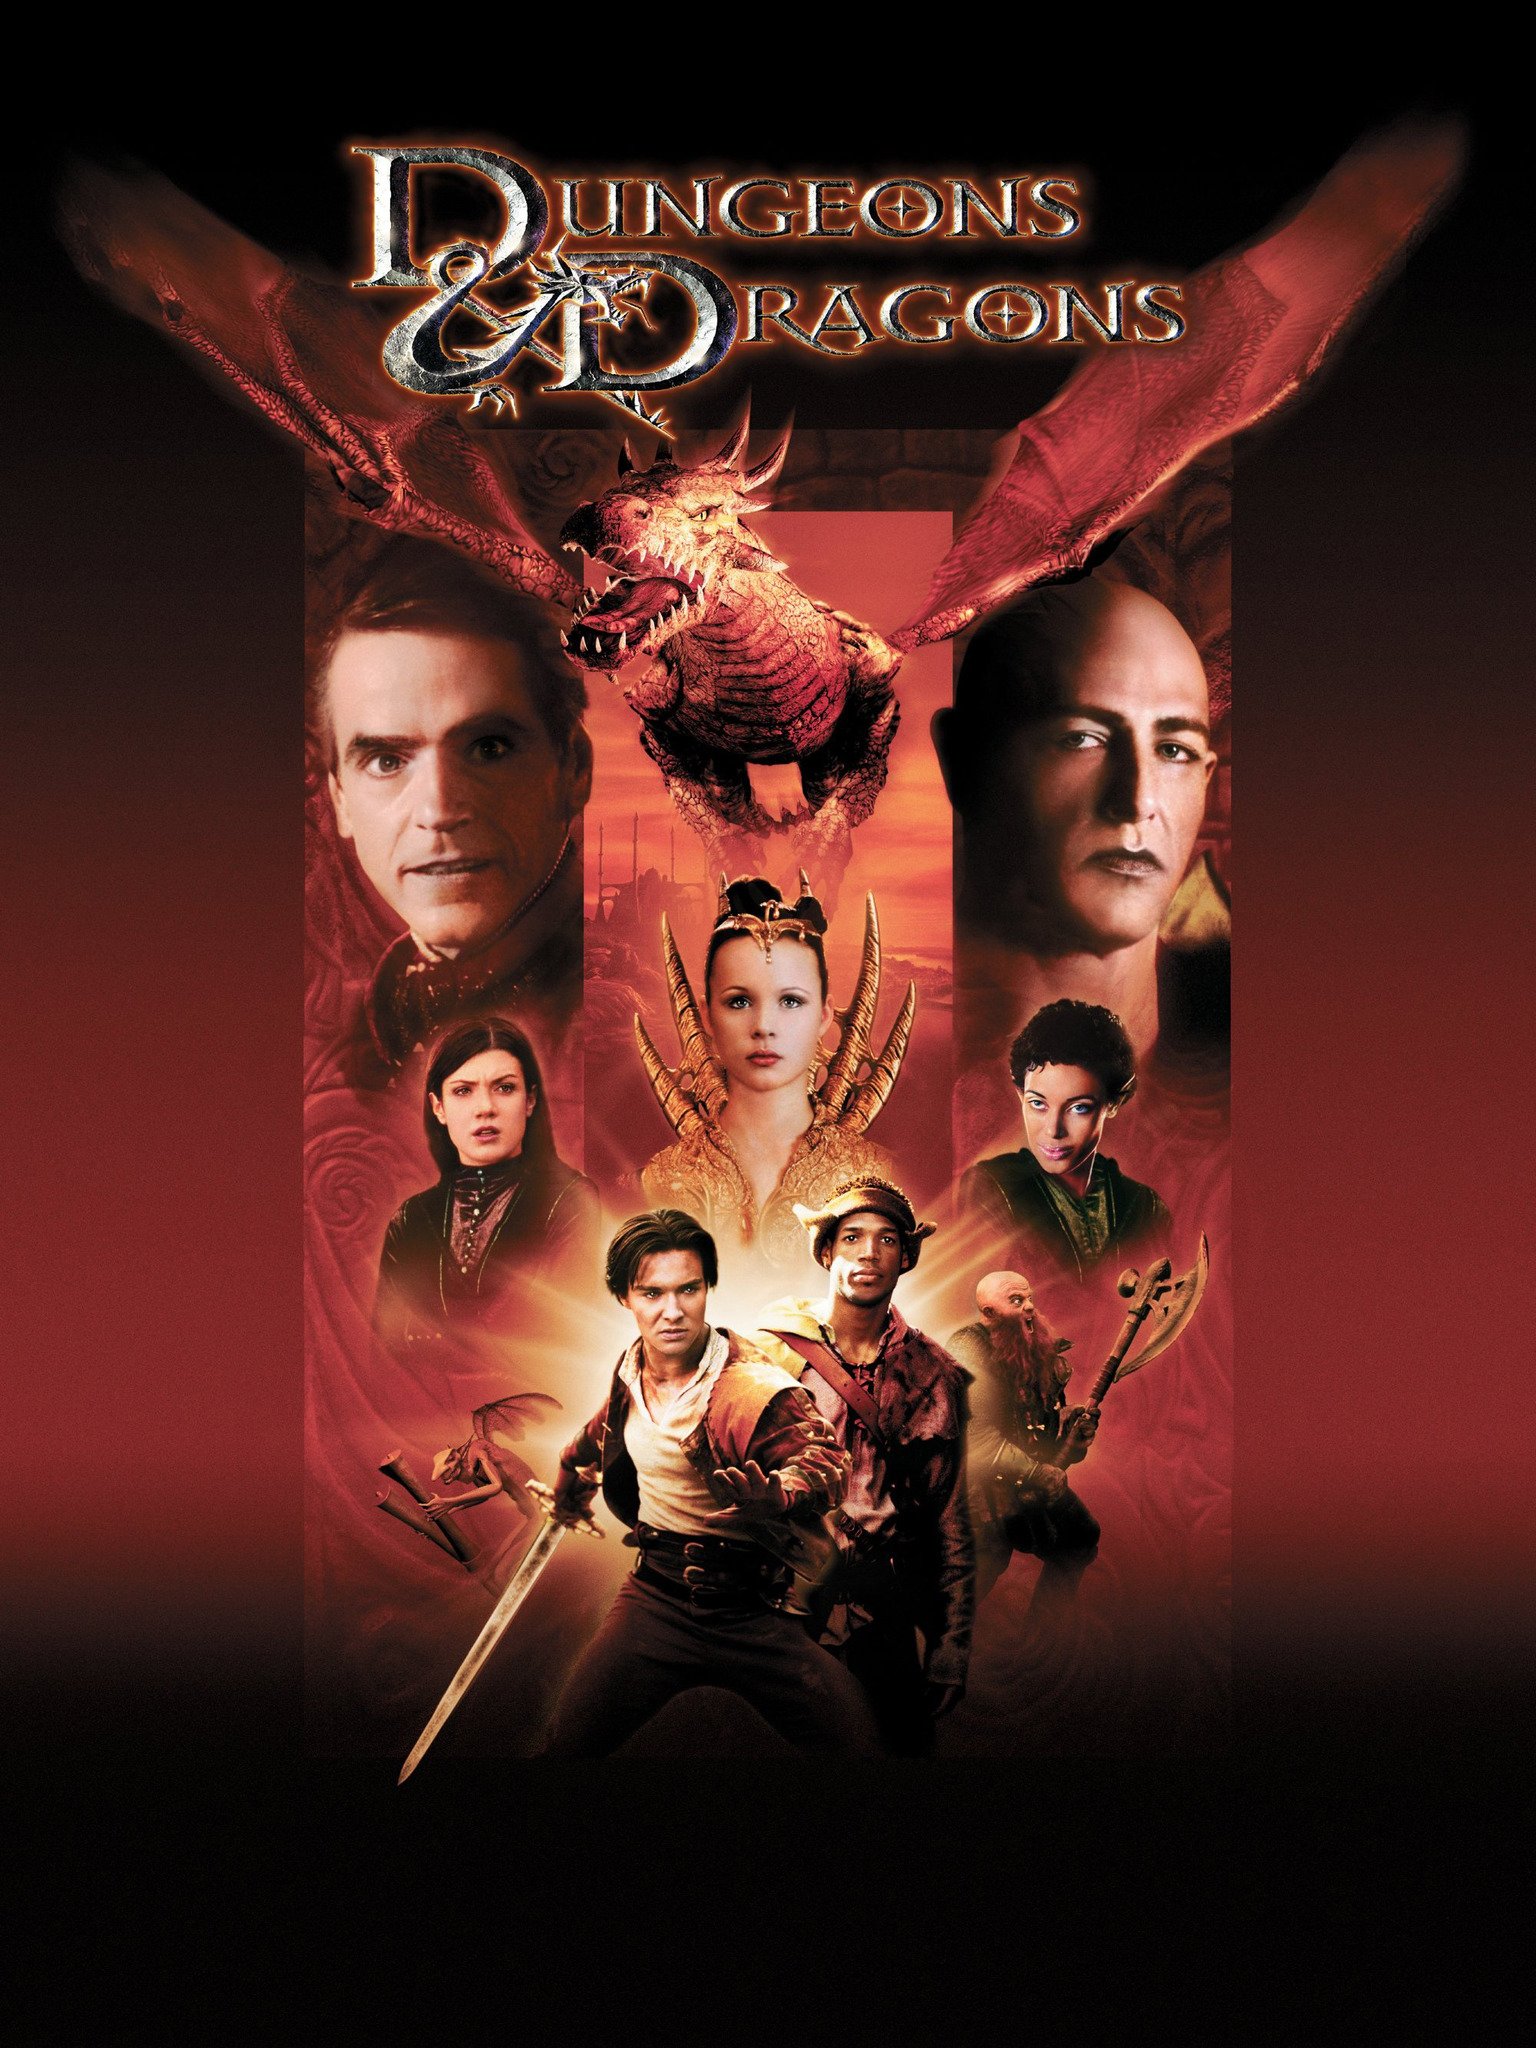 movie review for dungeons and dragons